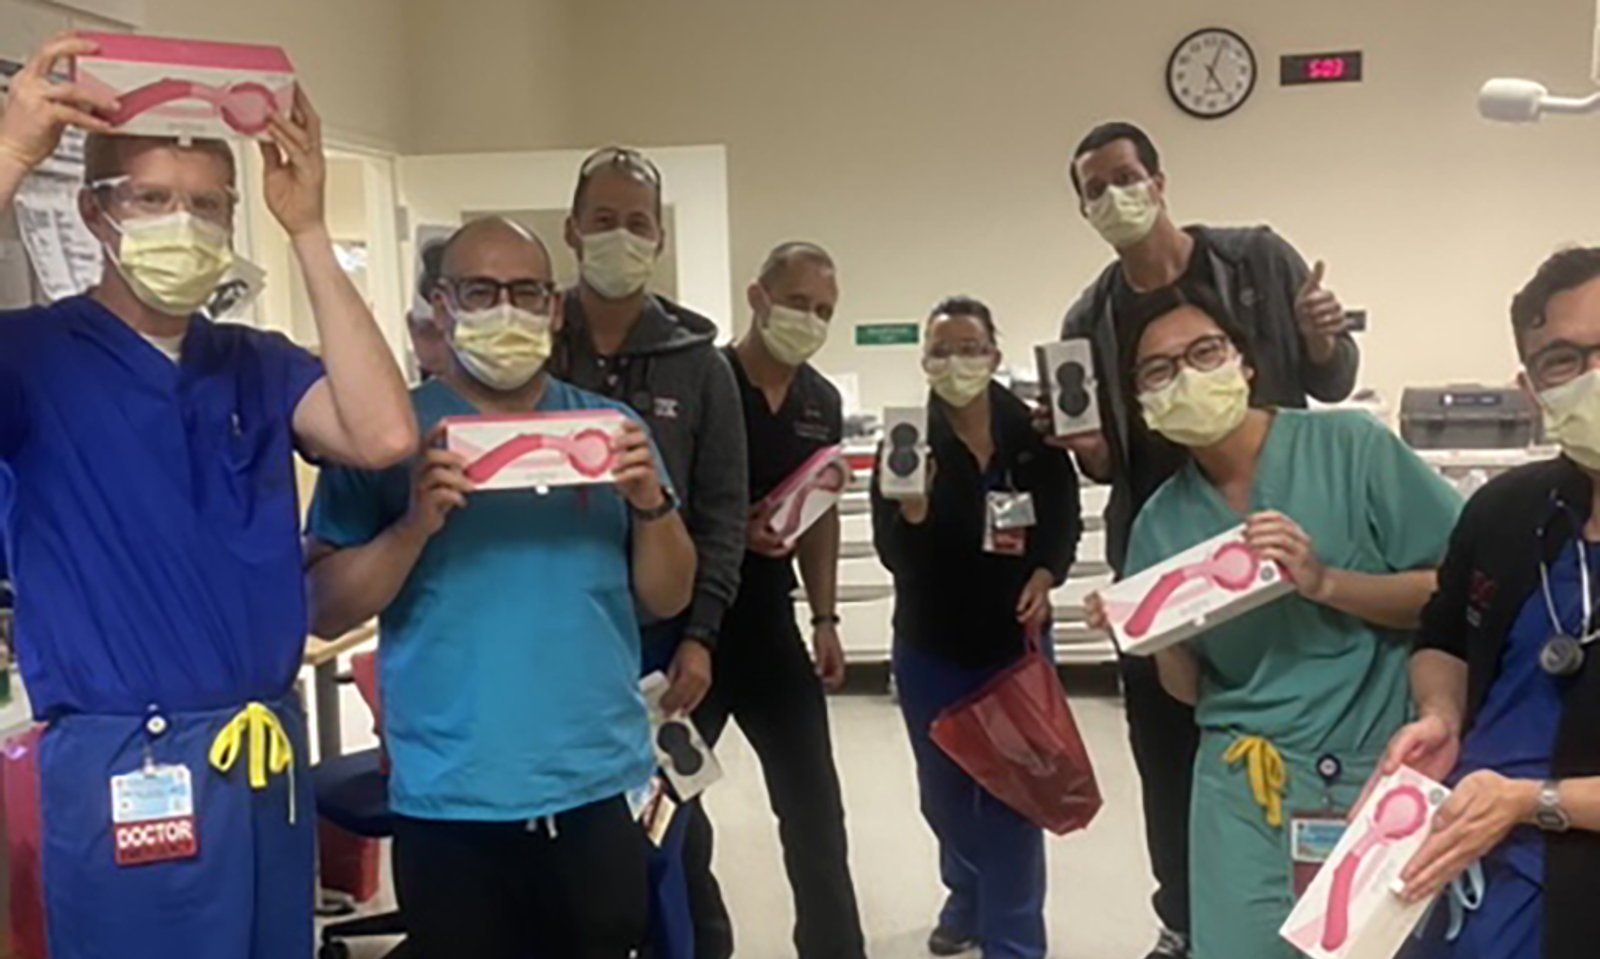 Pipedream Donating Jimmyjane Massagers to Local Hospital Staff